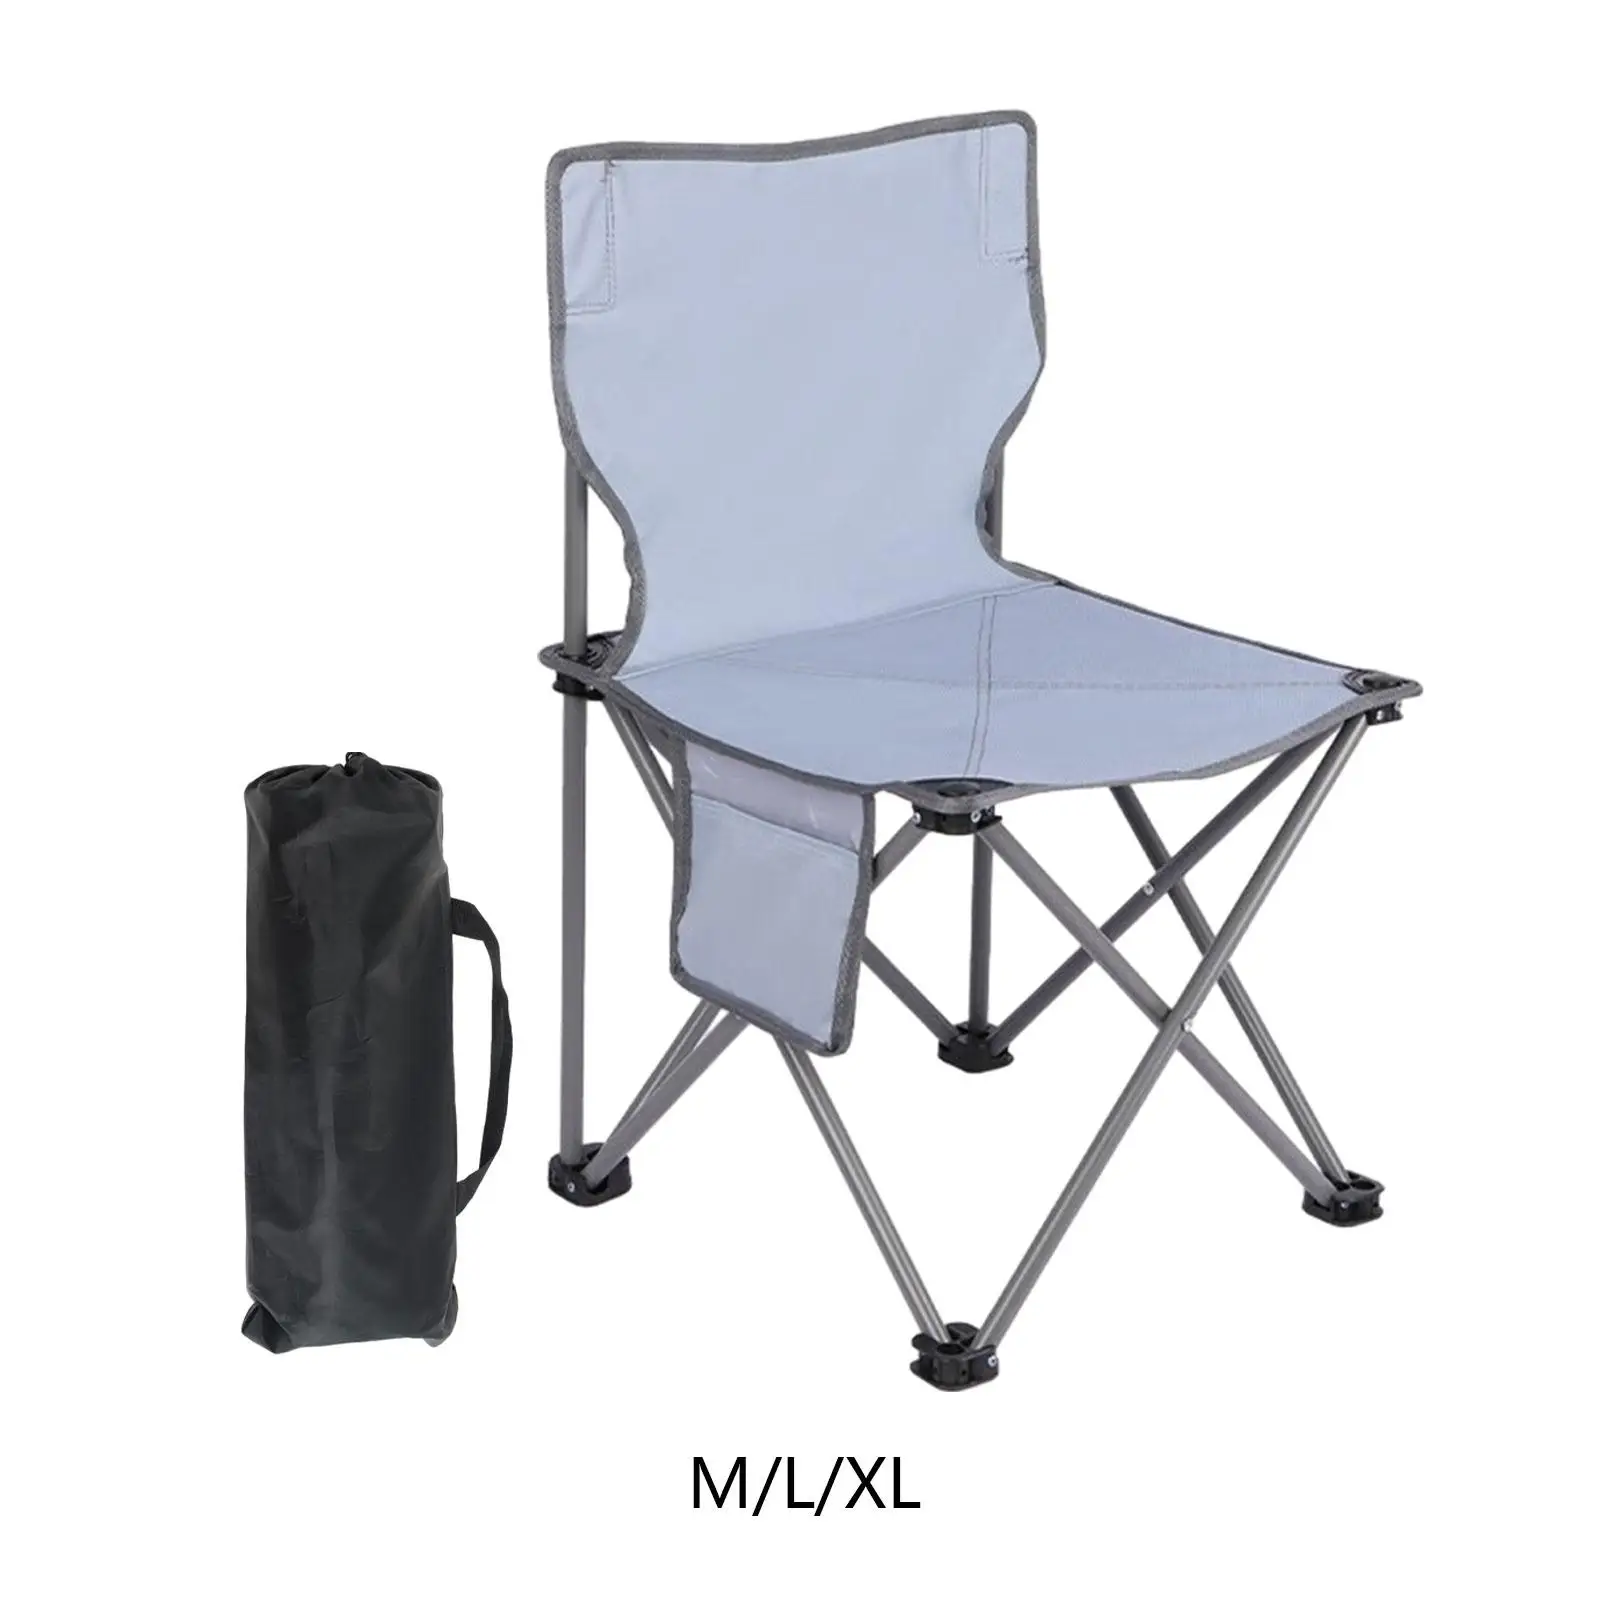 Portable Camping Chair High Back Lightweight for Heavy People Fishing Chair Folding Chair for Patio Lawn Picnic Concert Hiking